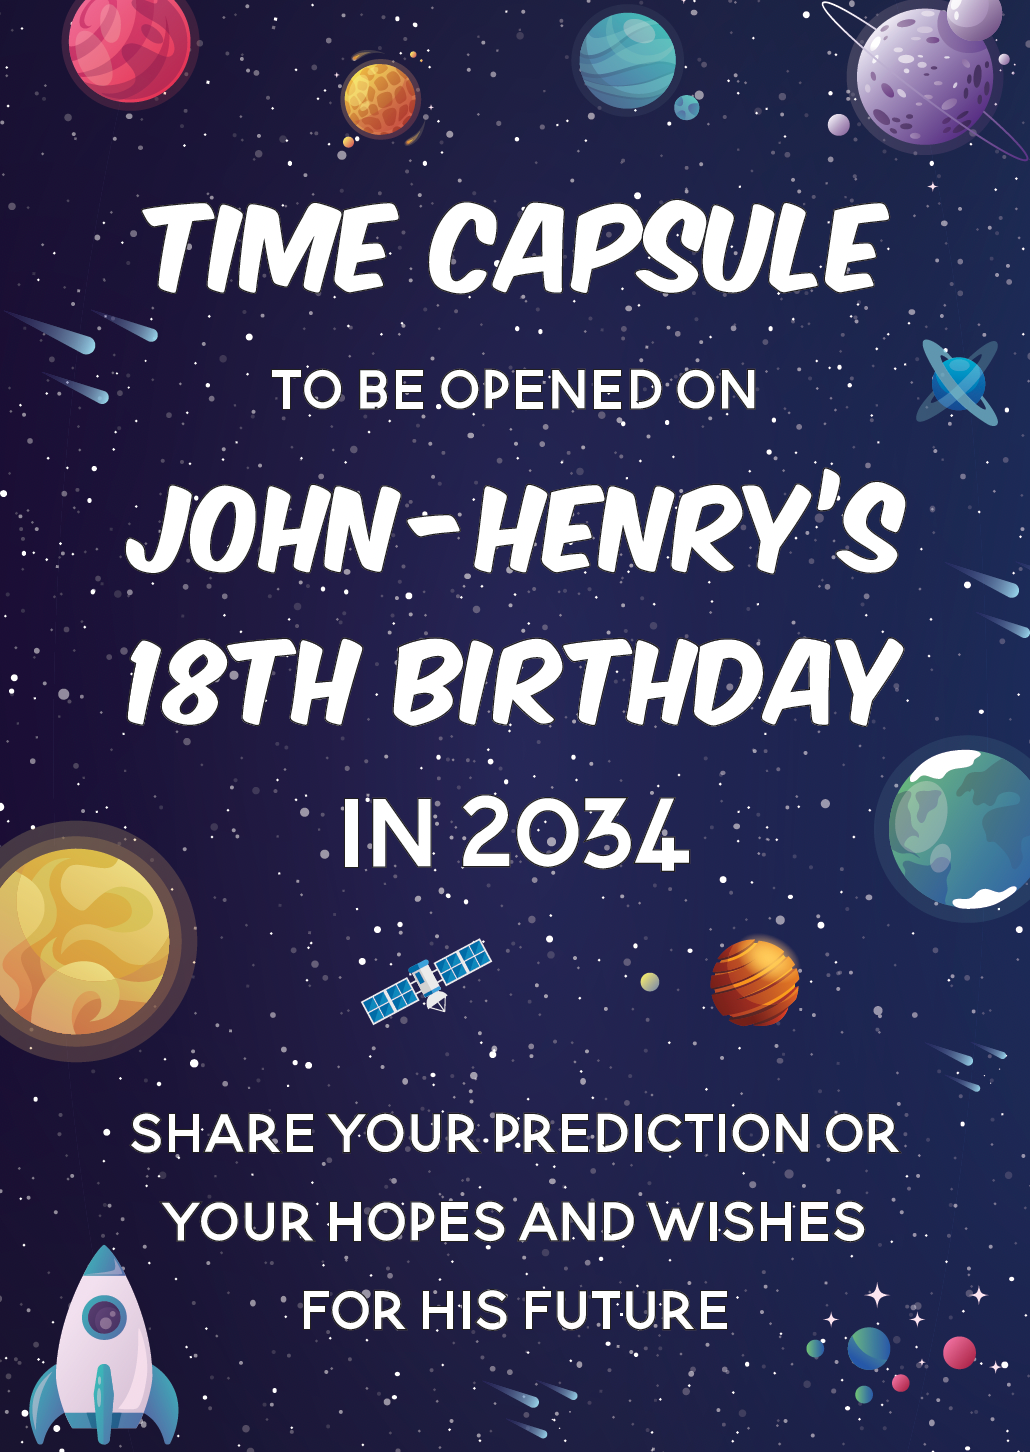 Galaxy time capsule poster